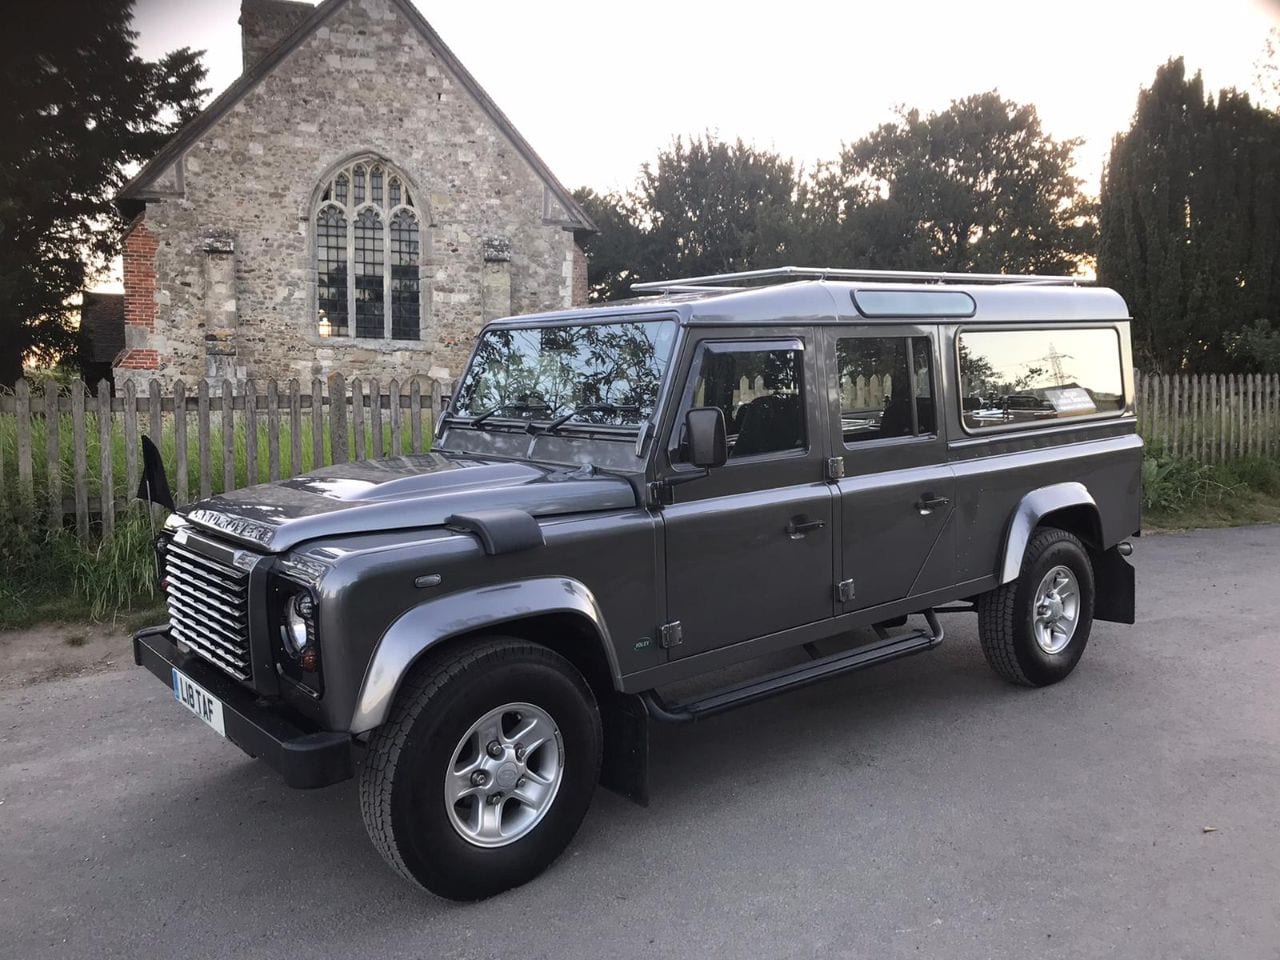 Terry Allen Land rover parked on country road outside village church